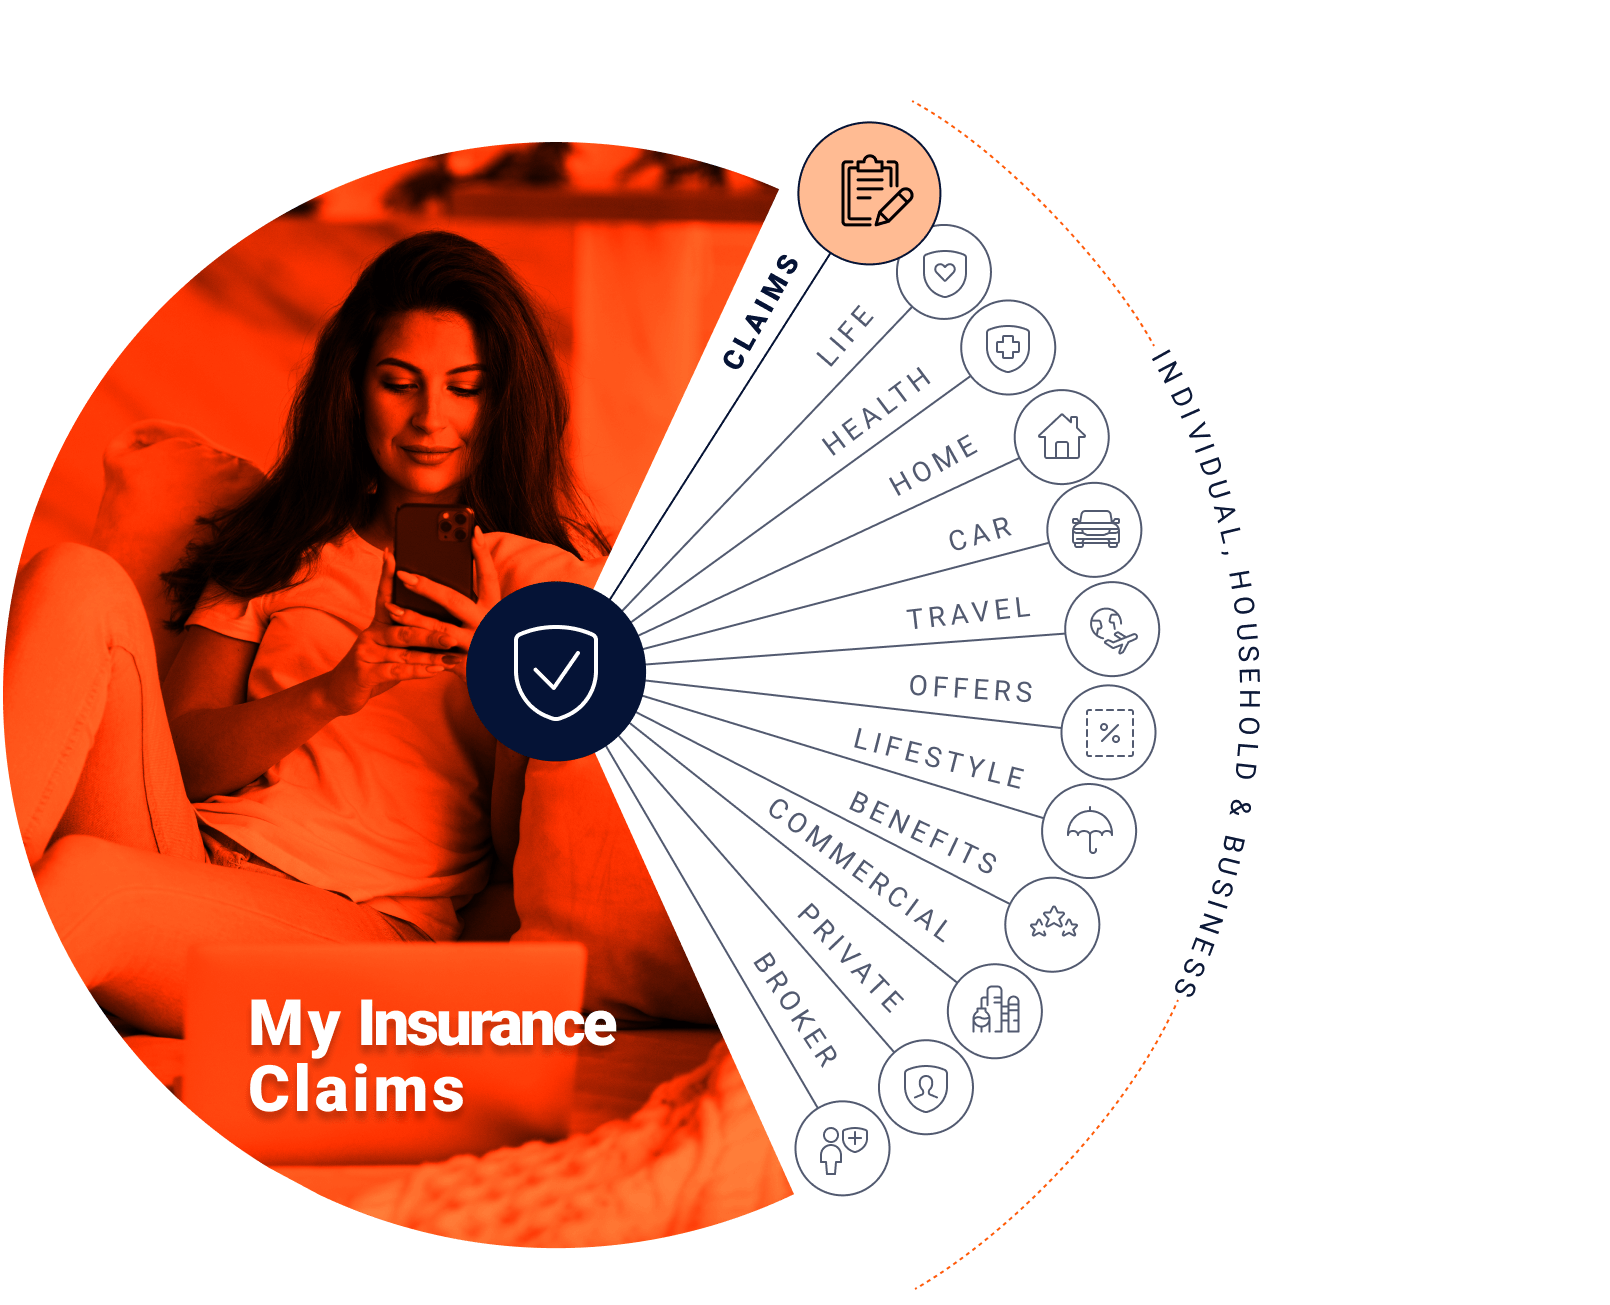 My Insurance claims: Claims, Life, health, home, car, travel, offers, lifestyle, benefits, commercial, Private, and broker